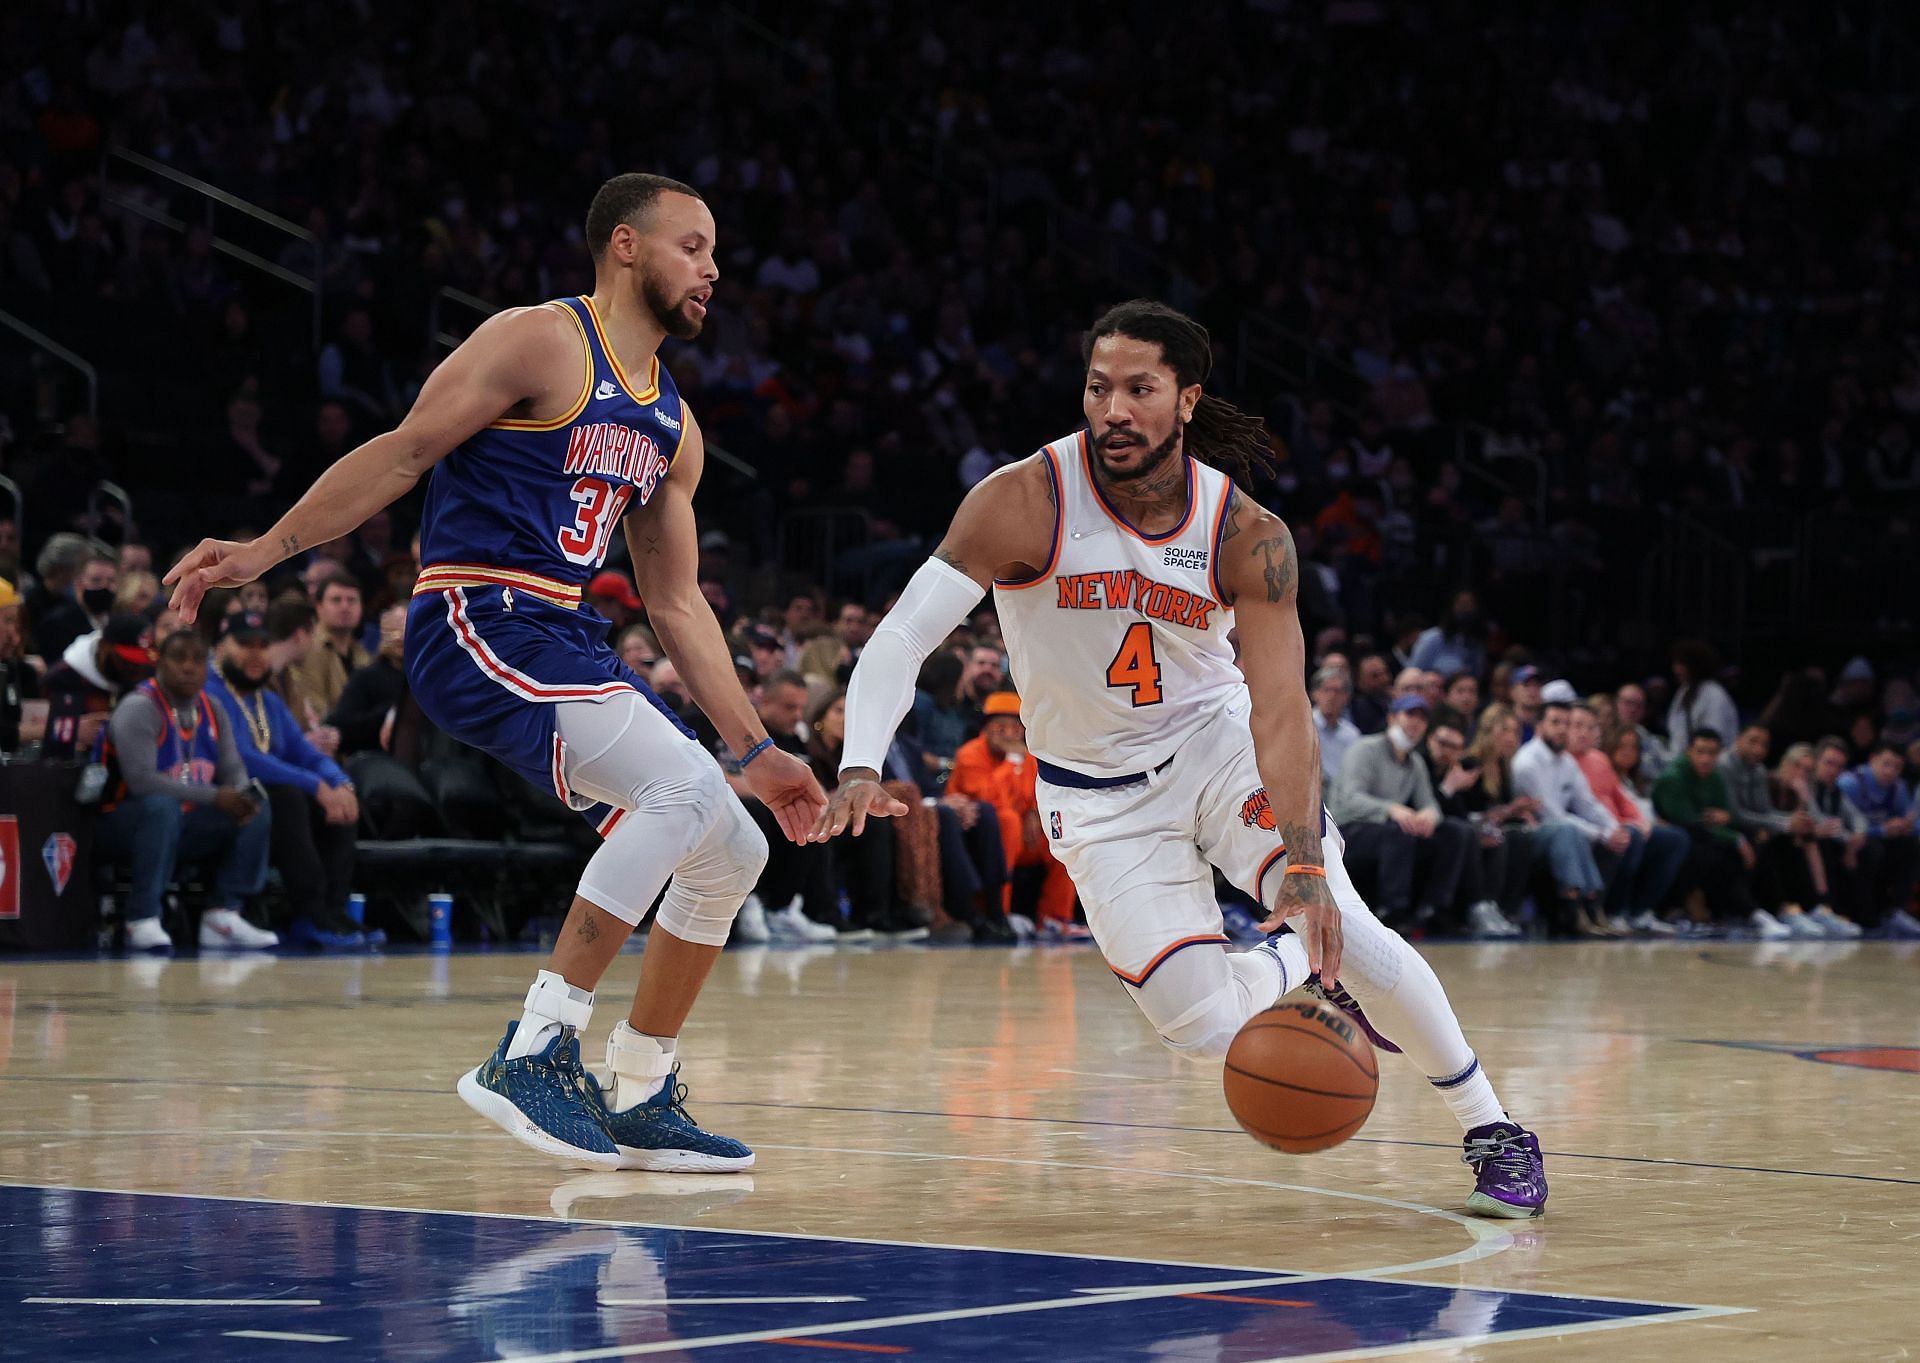 Derrick Rose of the New York Knicks drives against Stephen Curry of the Golden State Warriors